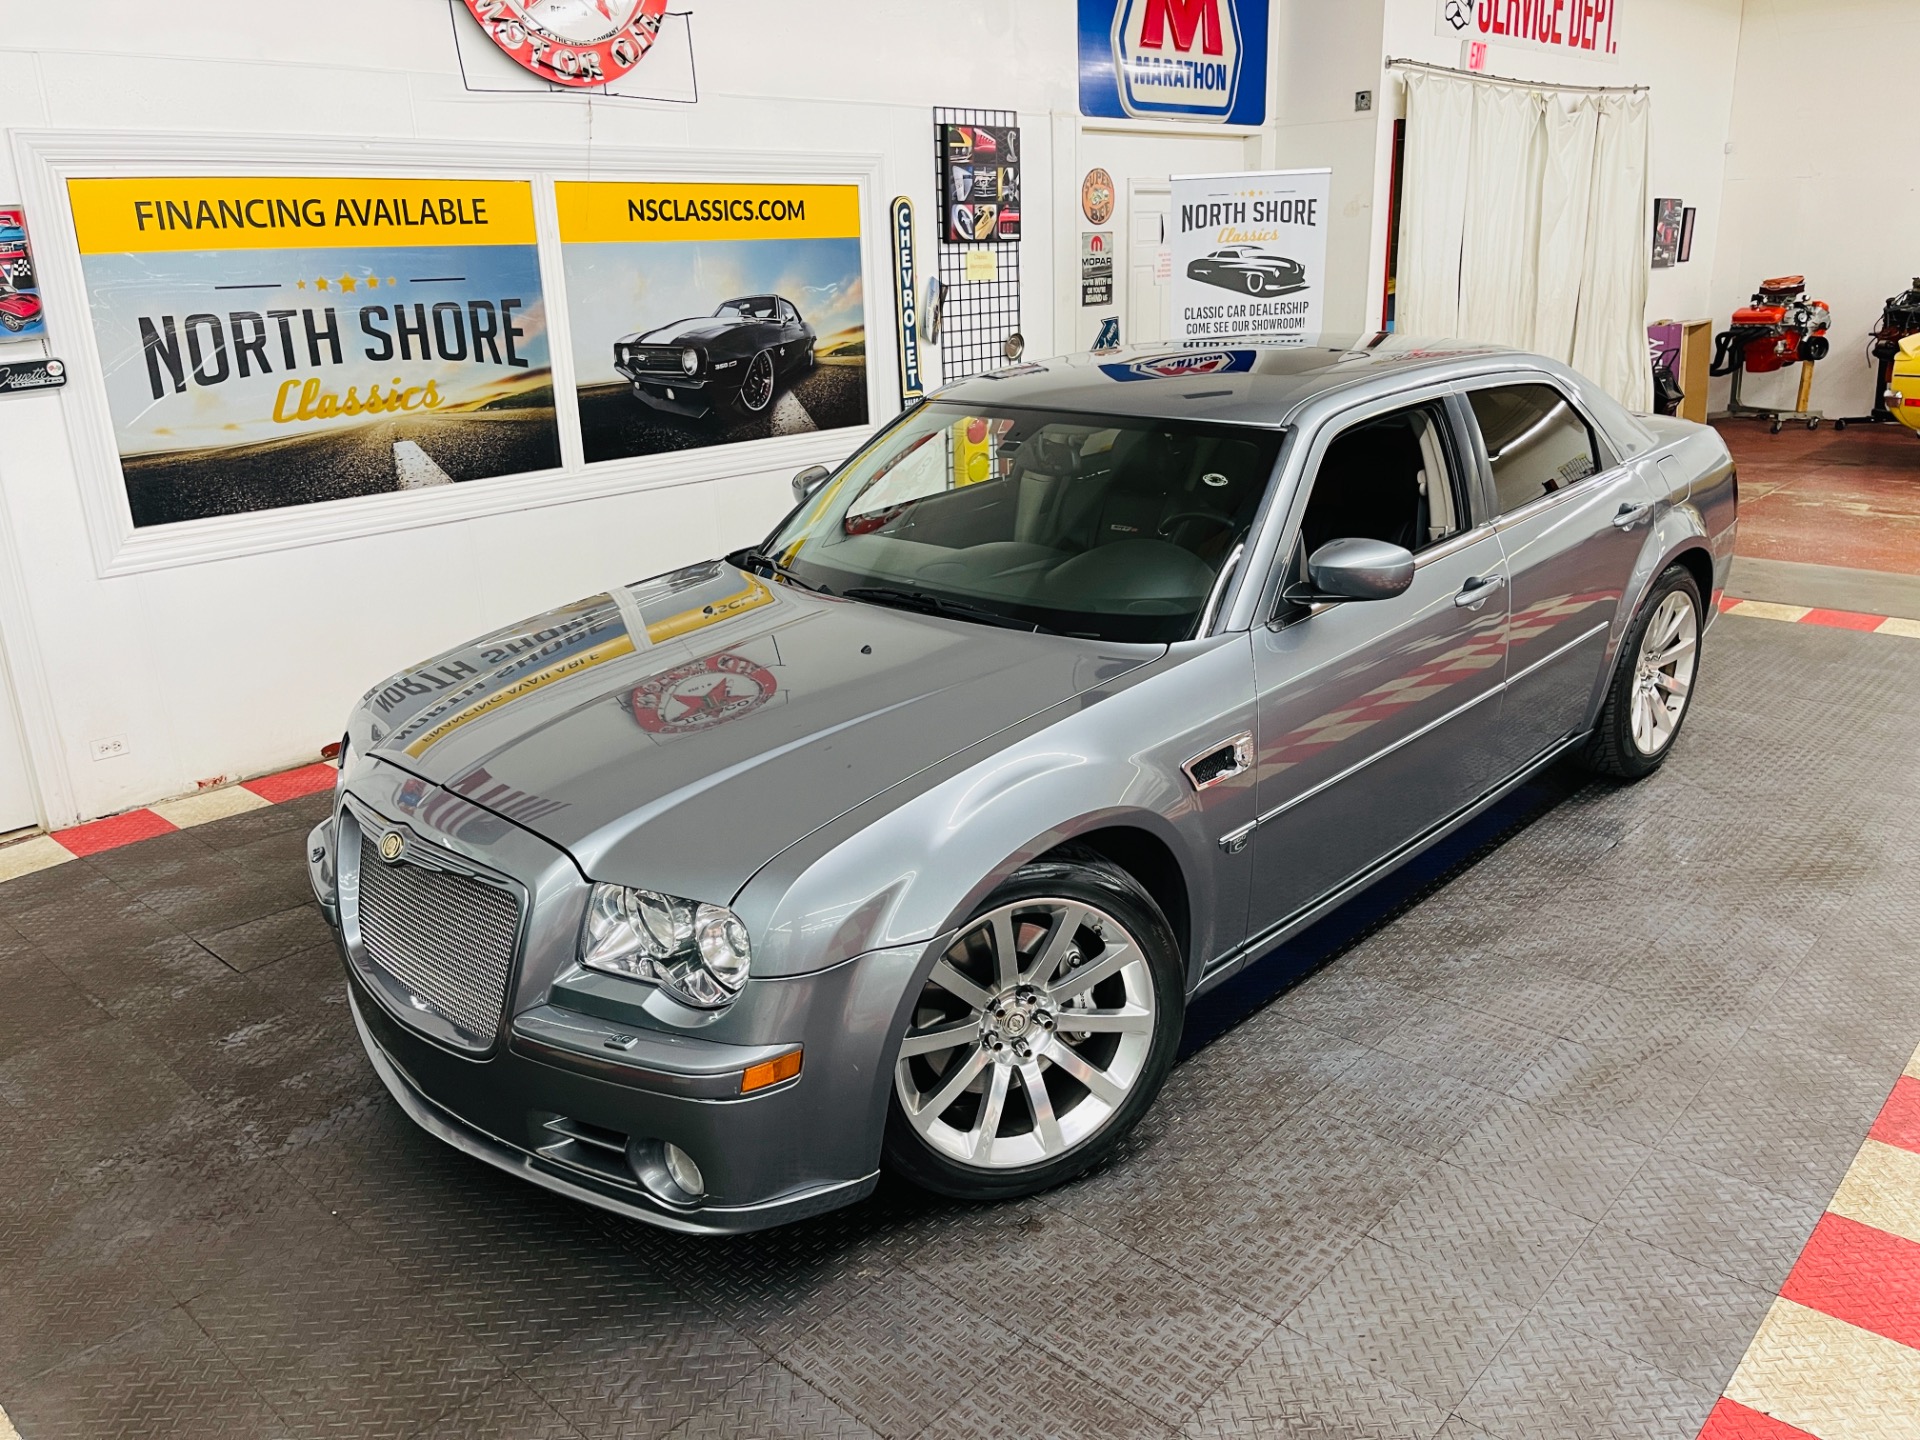 Used 2006 Chrysler 300 SRT-8 - SEE VIDEO For Sale (Sold) | North Shore  Classics Stock #06484JWCV